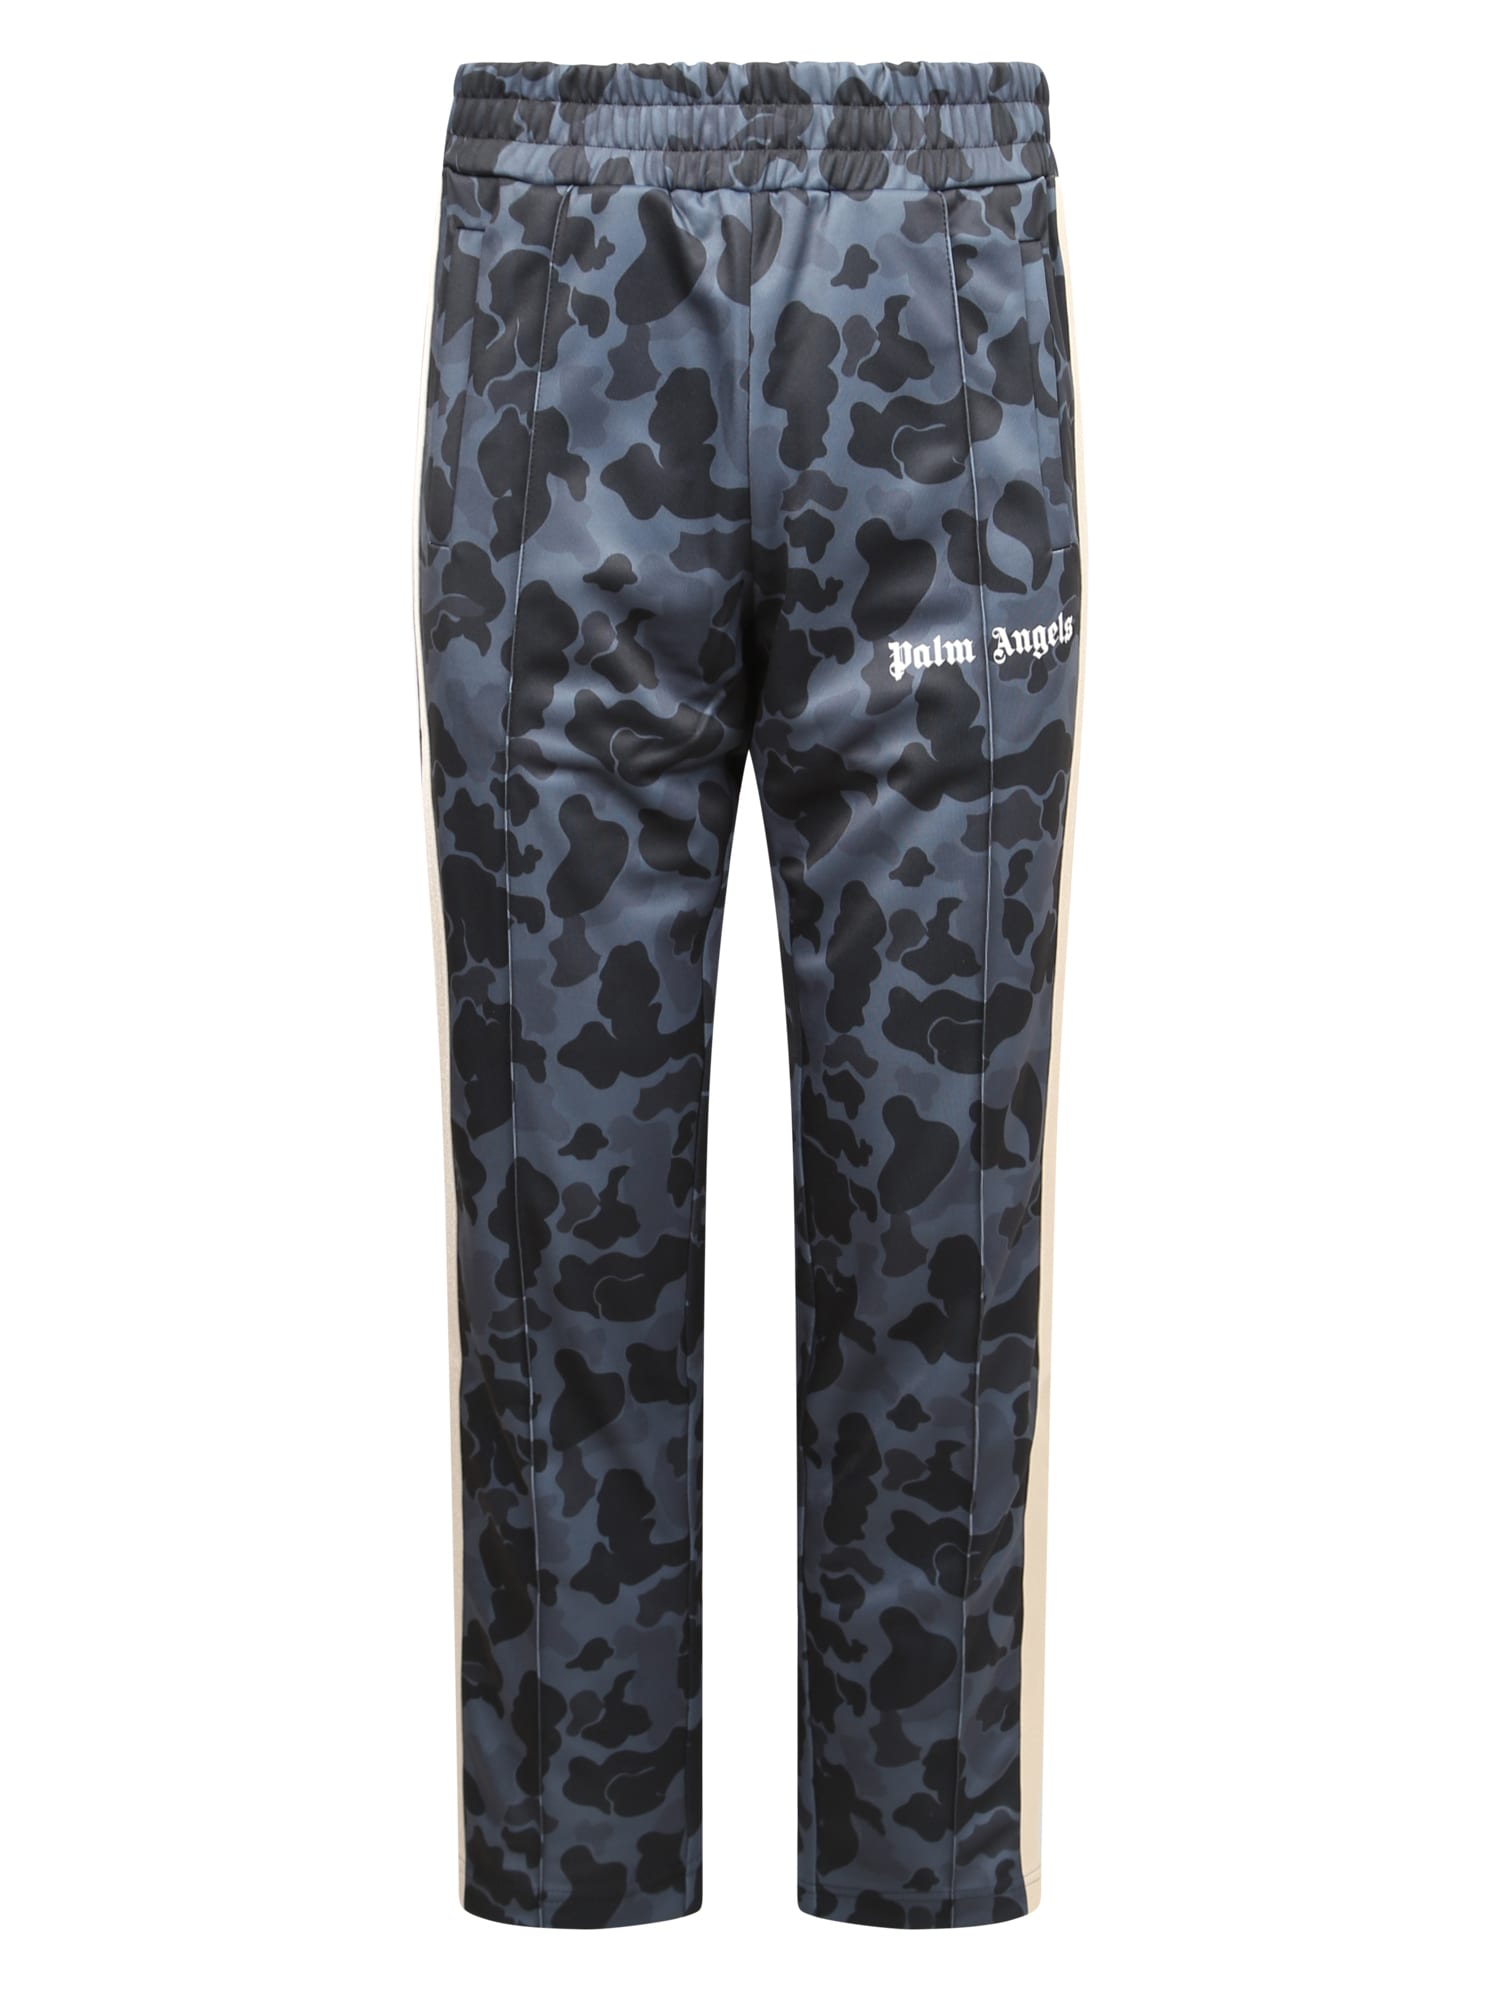 Palm Angels Camouflage Print Track Pants